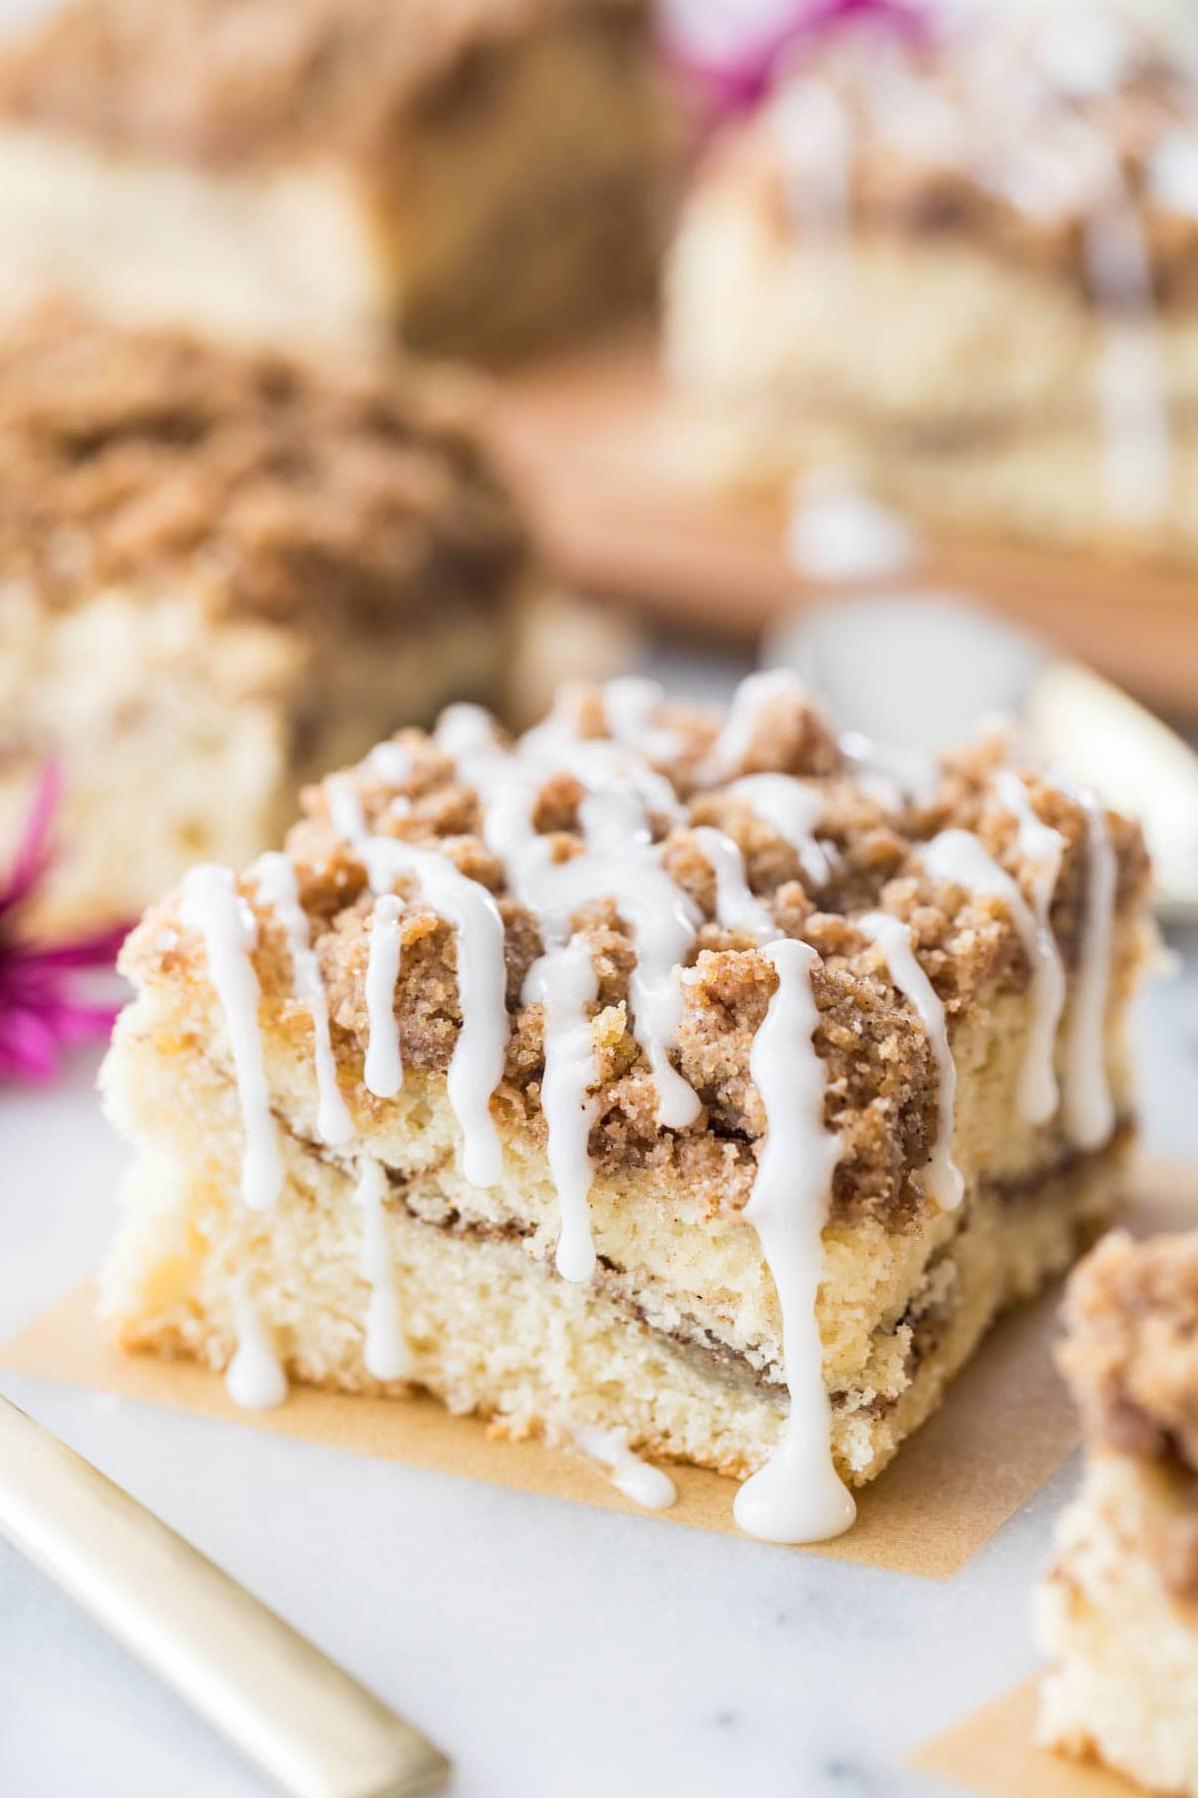  First slice of cinnamon coffee cake, waiting for you to enjoy!